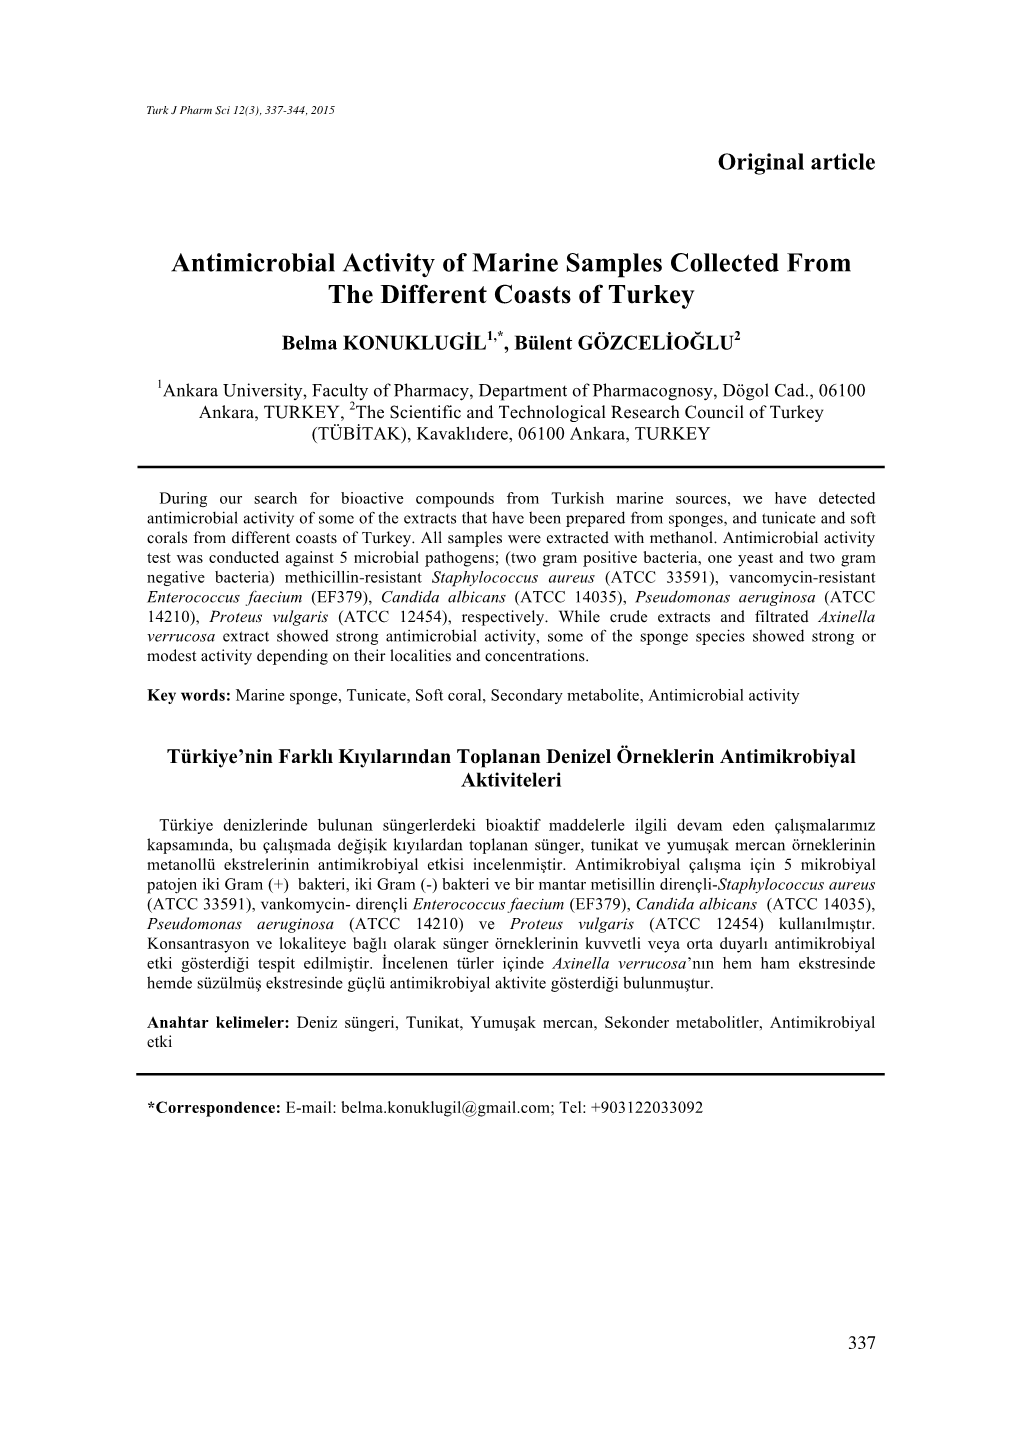 Antimicrobial Activity of Marine Samples Collected from the Different Coasts of Turkey